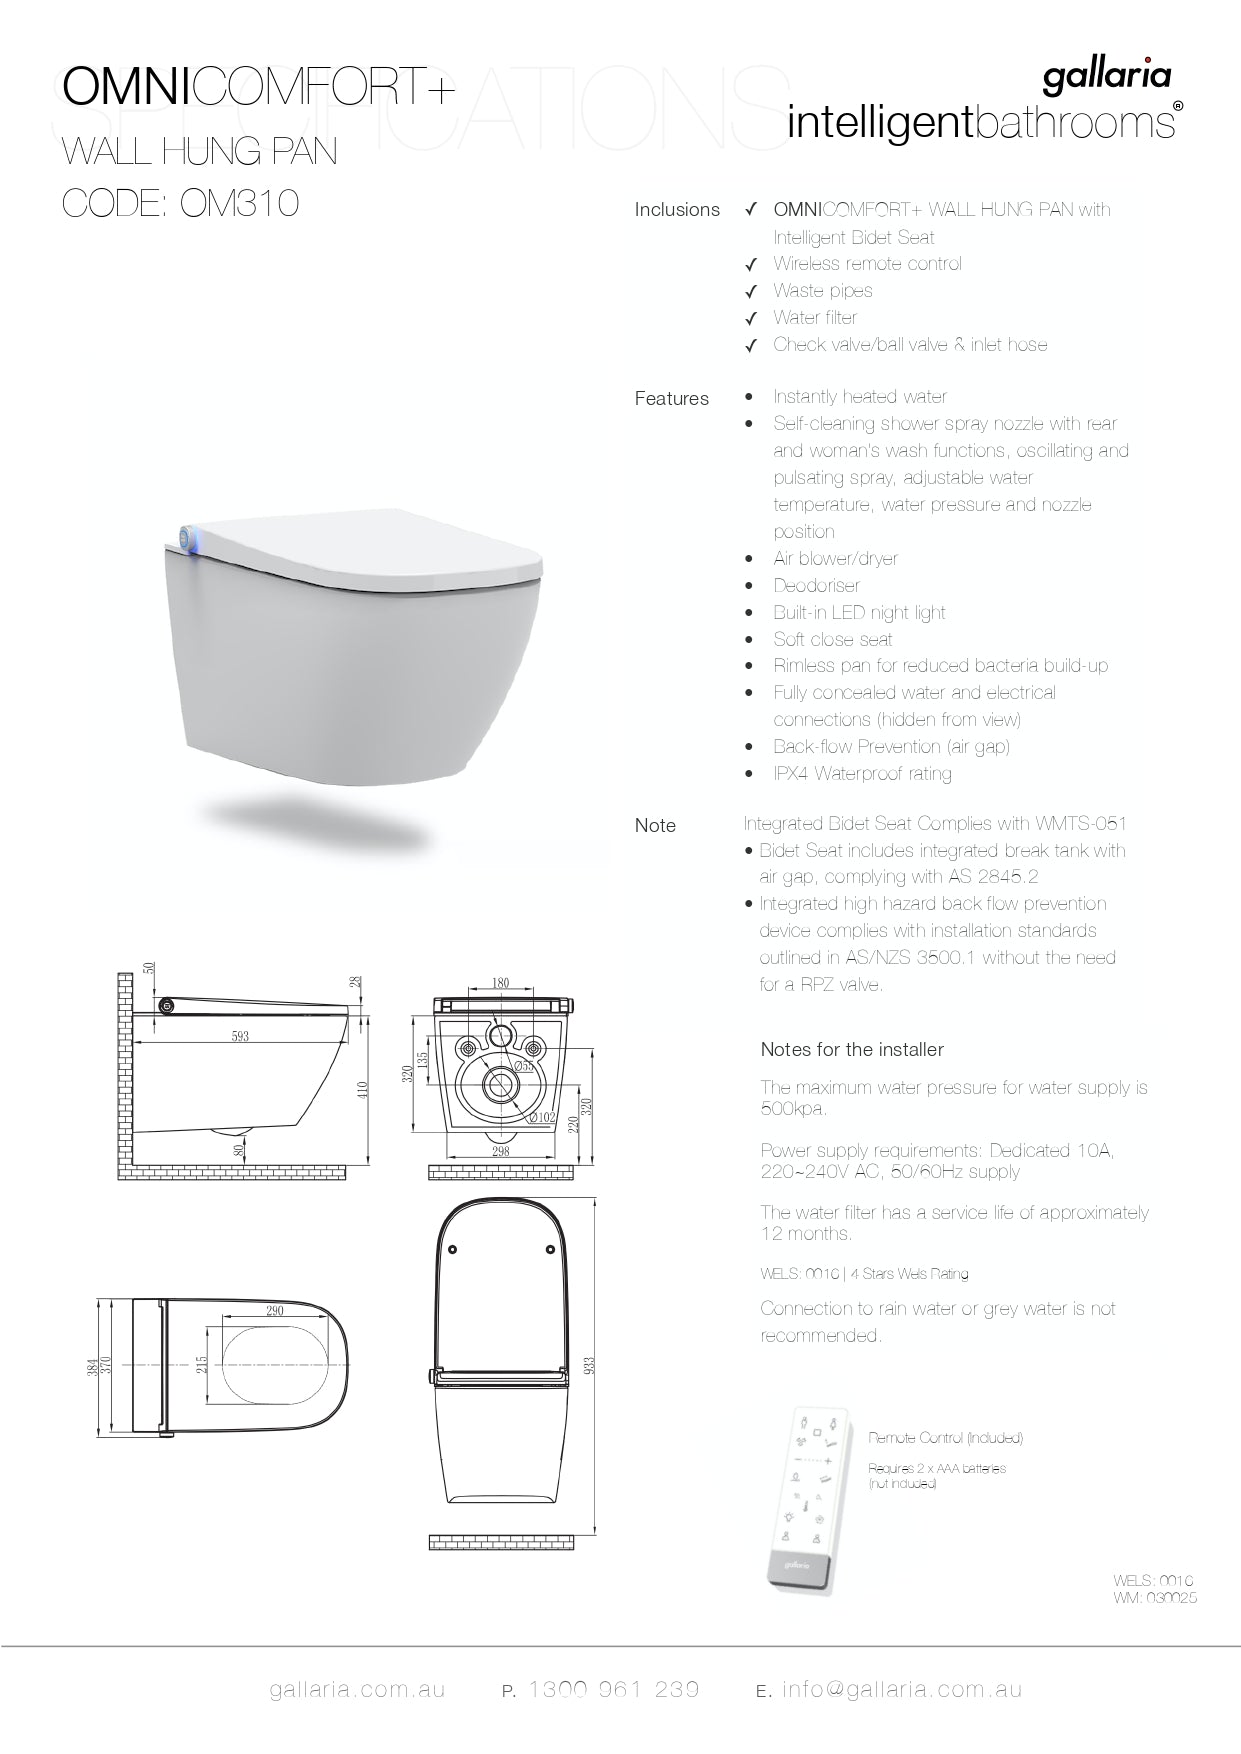 GALLARIA OMNI COMFORT RIMLESS WALL HUNG PAN AND REMOTE WASHLET PACKAGE GLOSS WHITE